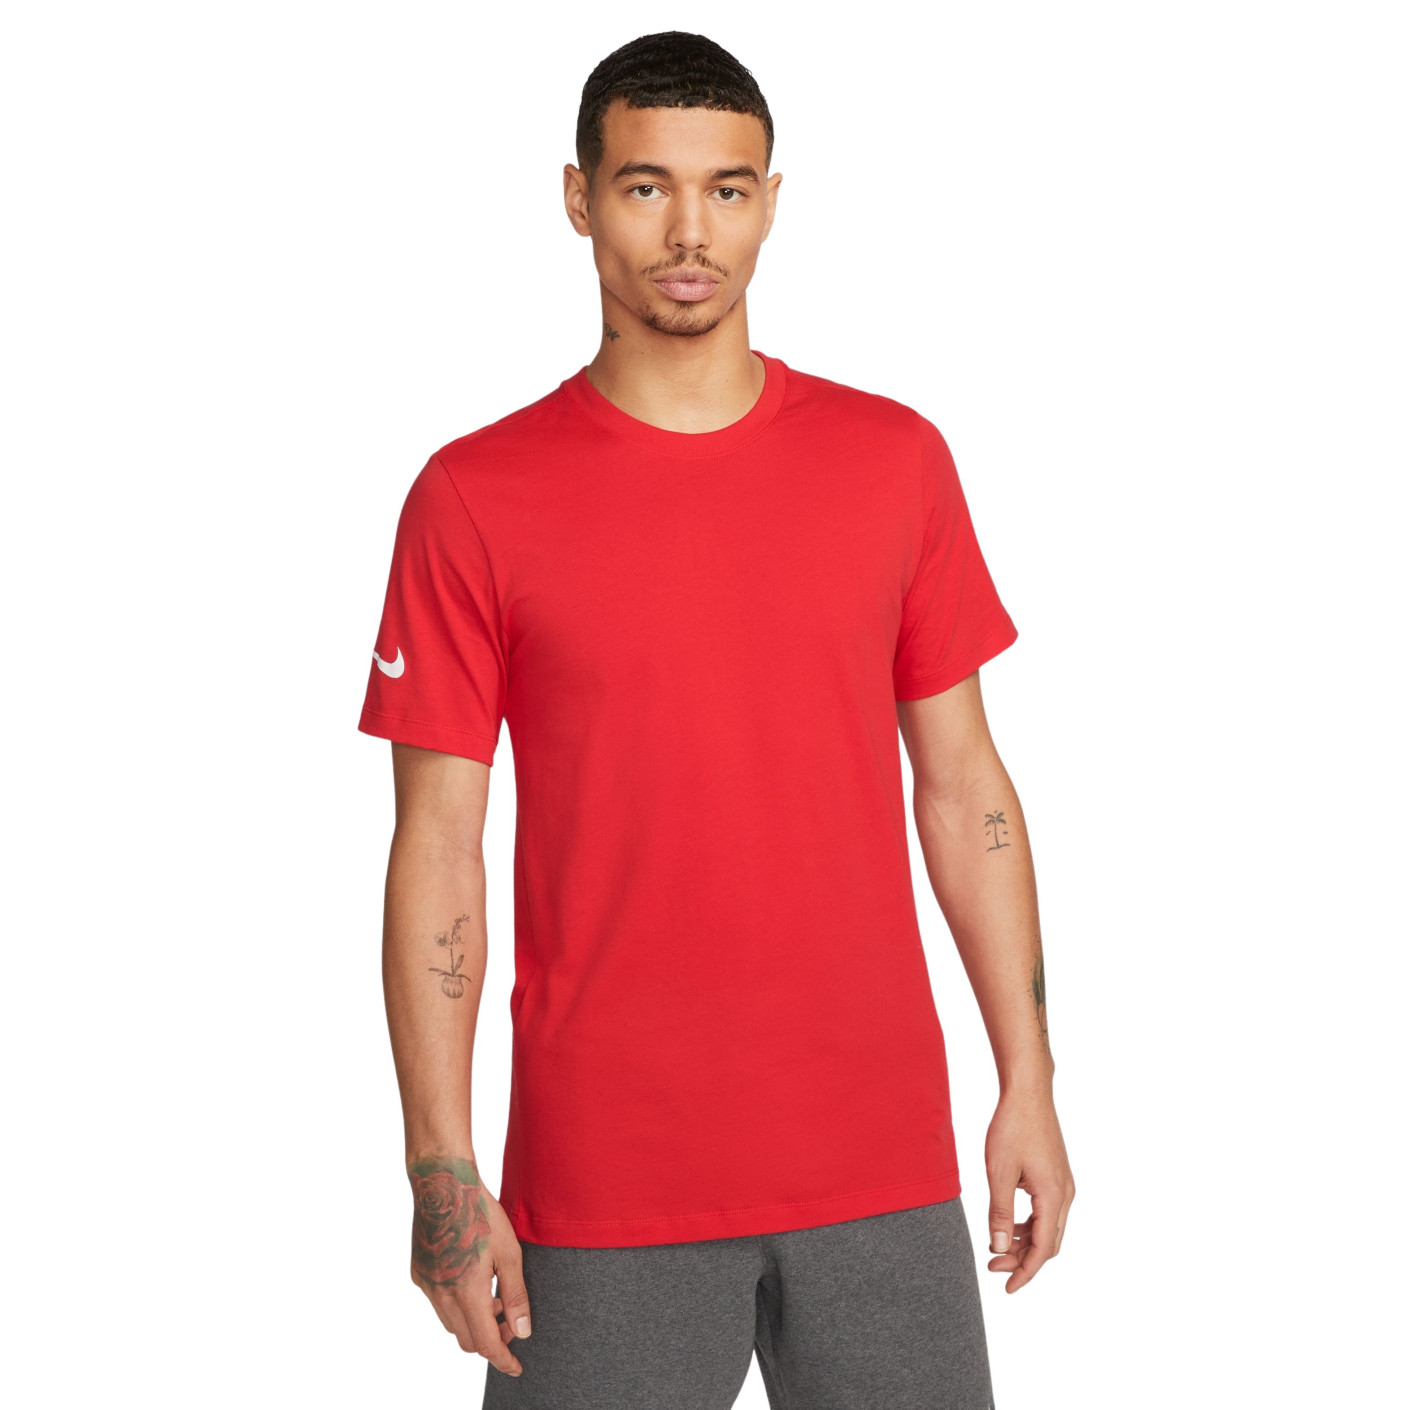 Nike T-Shirt Park 20 Red